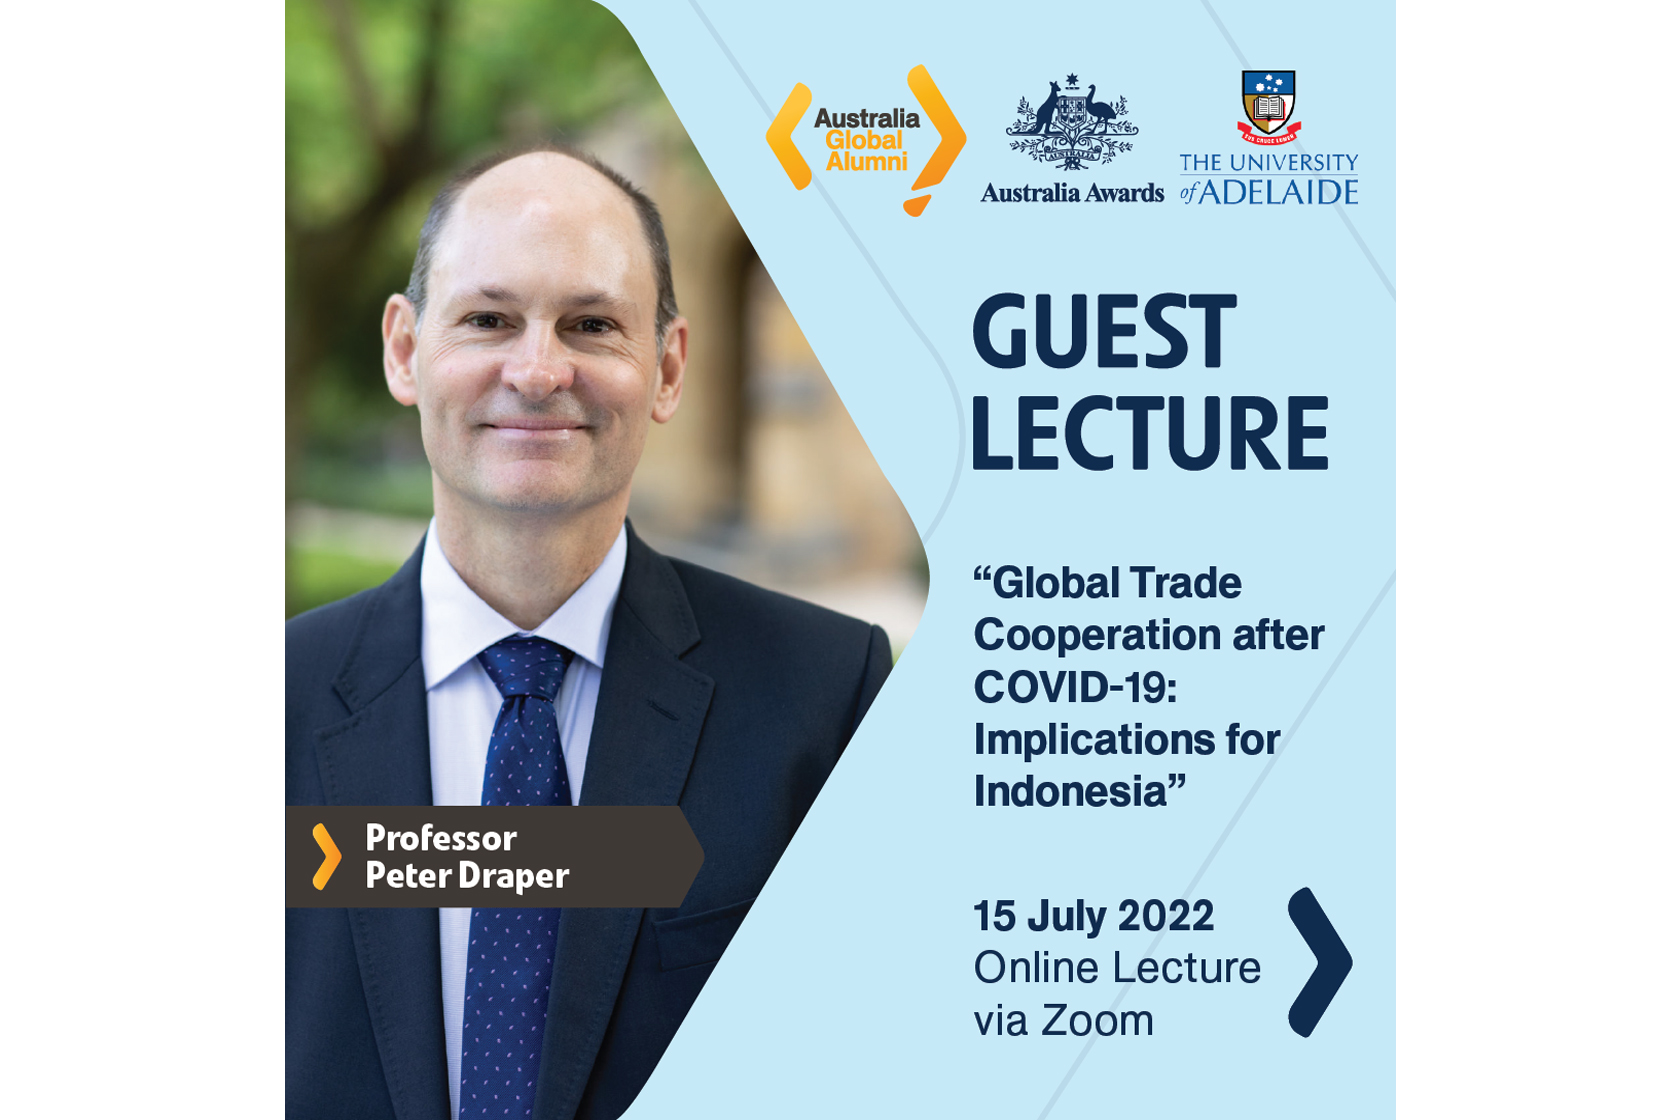 Join Our Lecture on Global Trade Cooperation after COVID-19: Implications for Indonesia